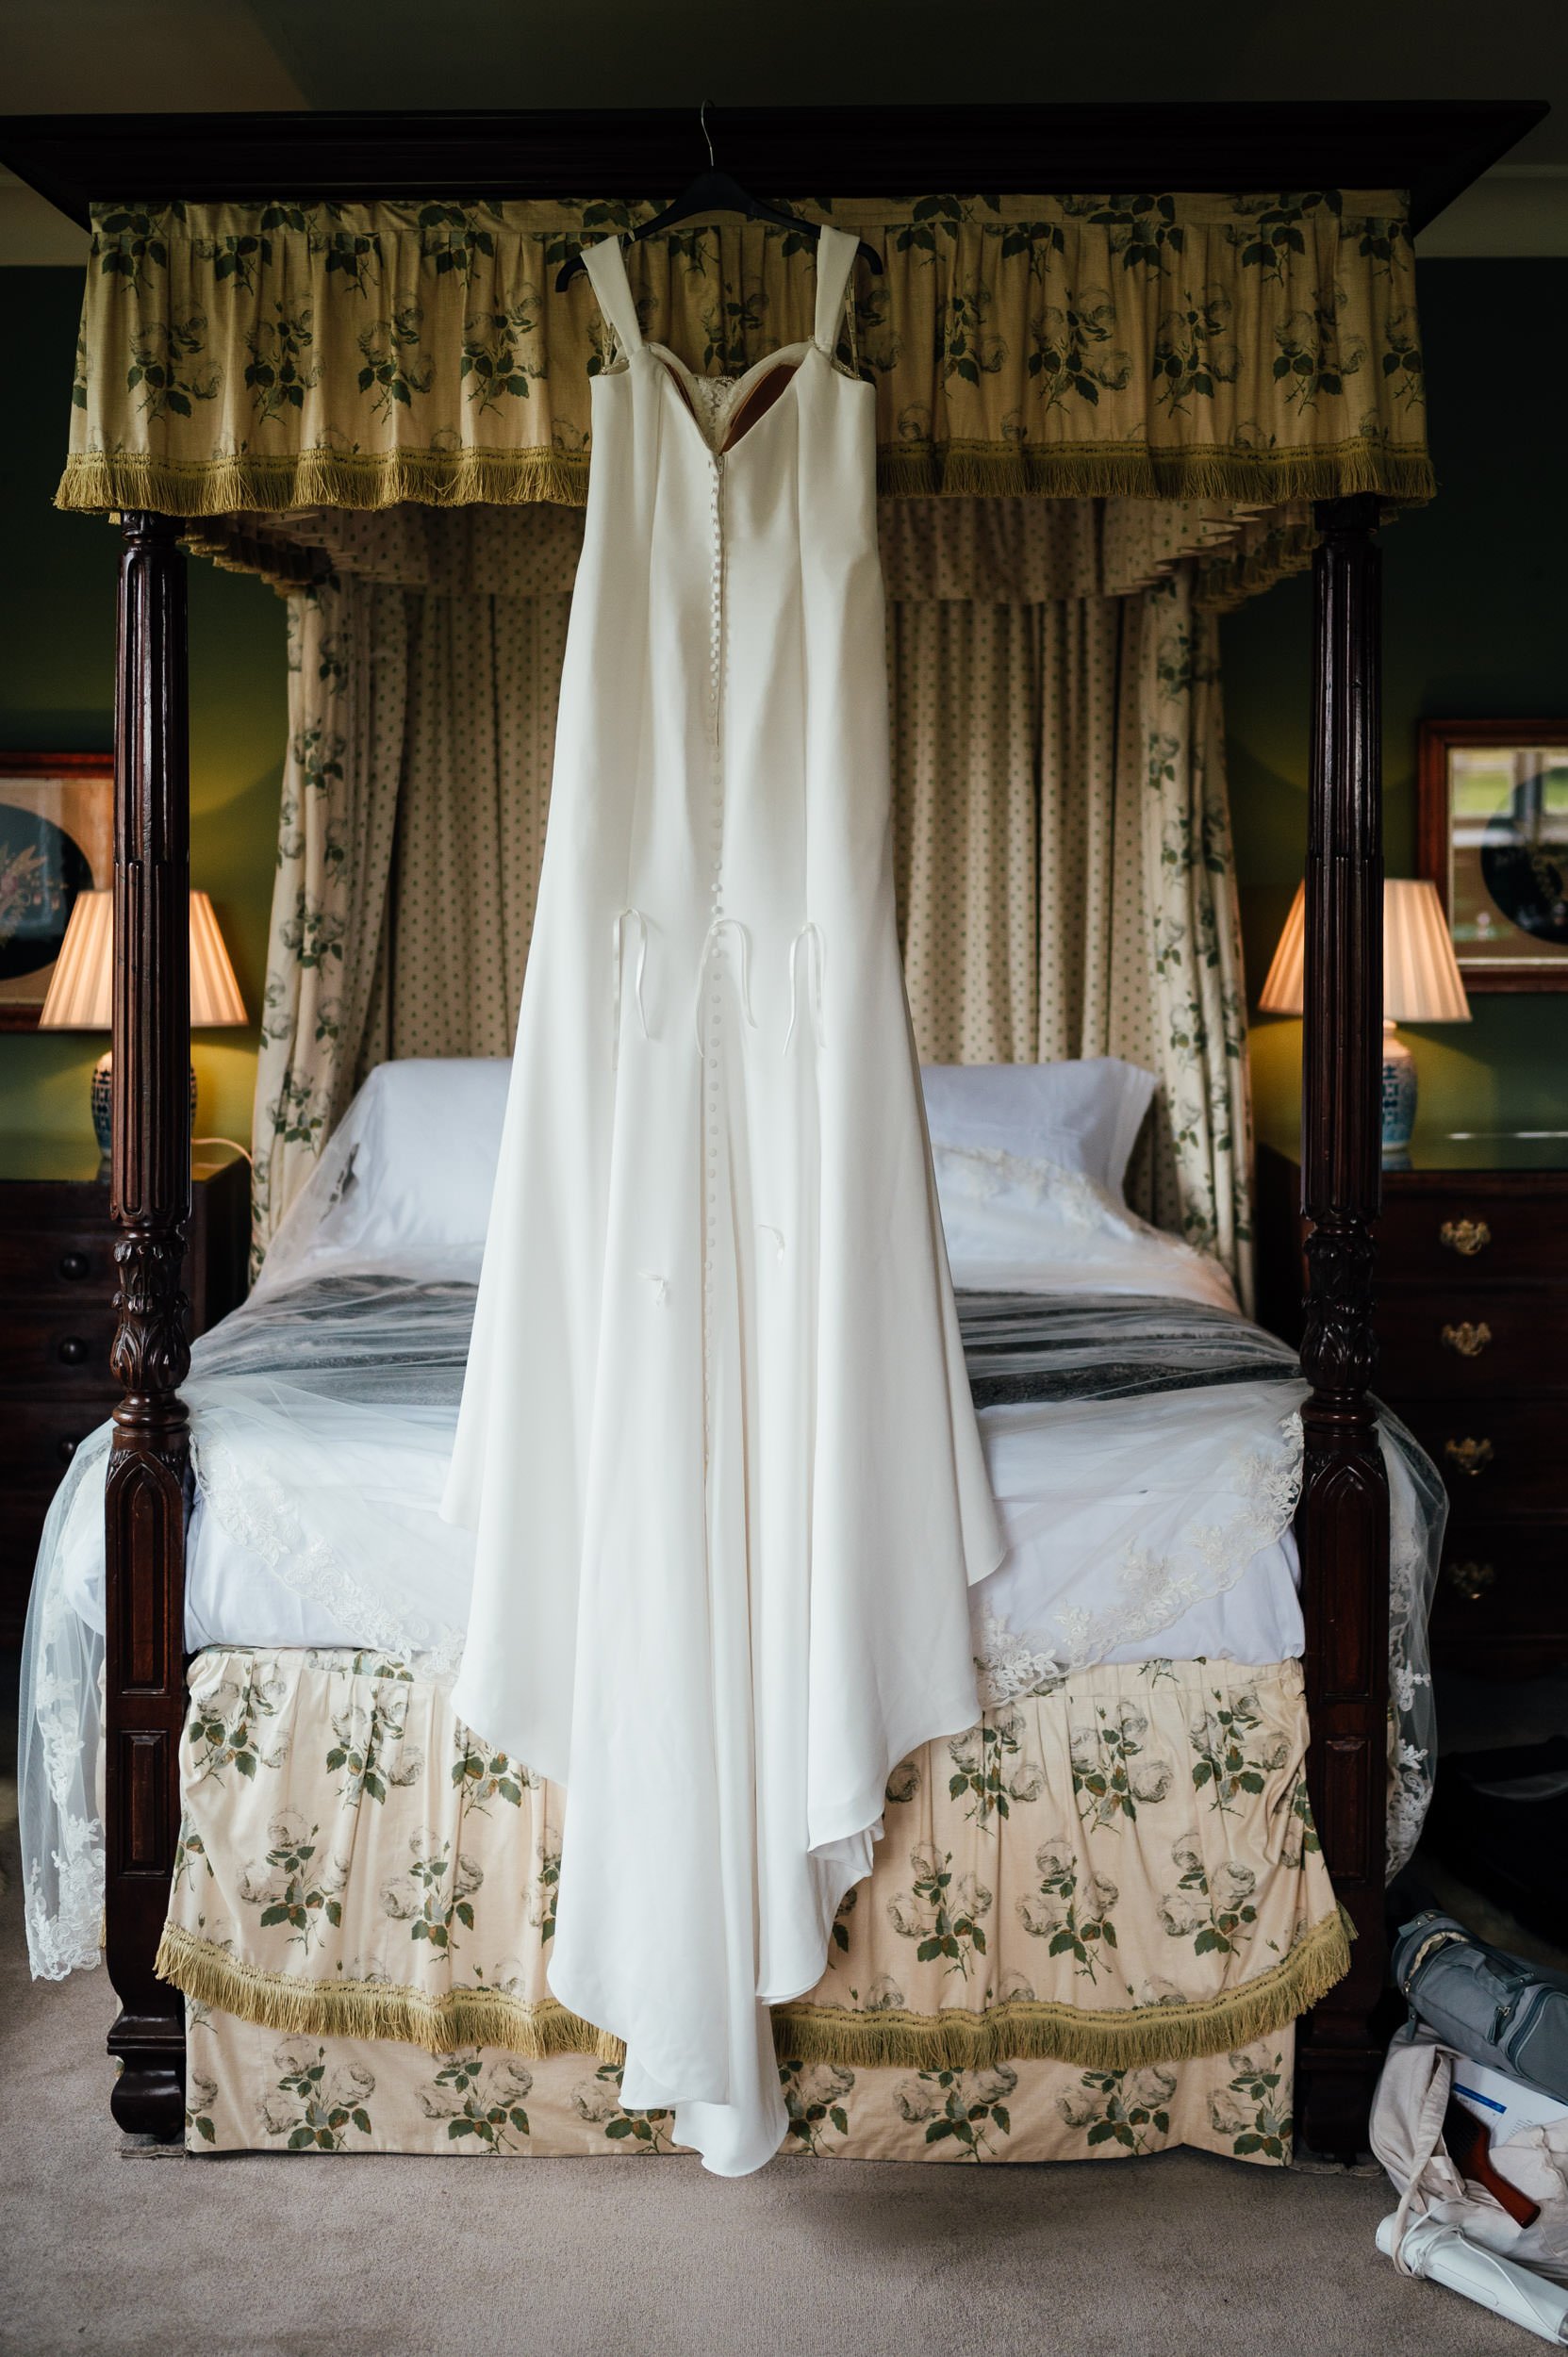 brides dress hanging from the four poster bed